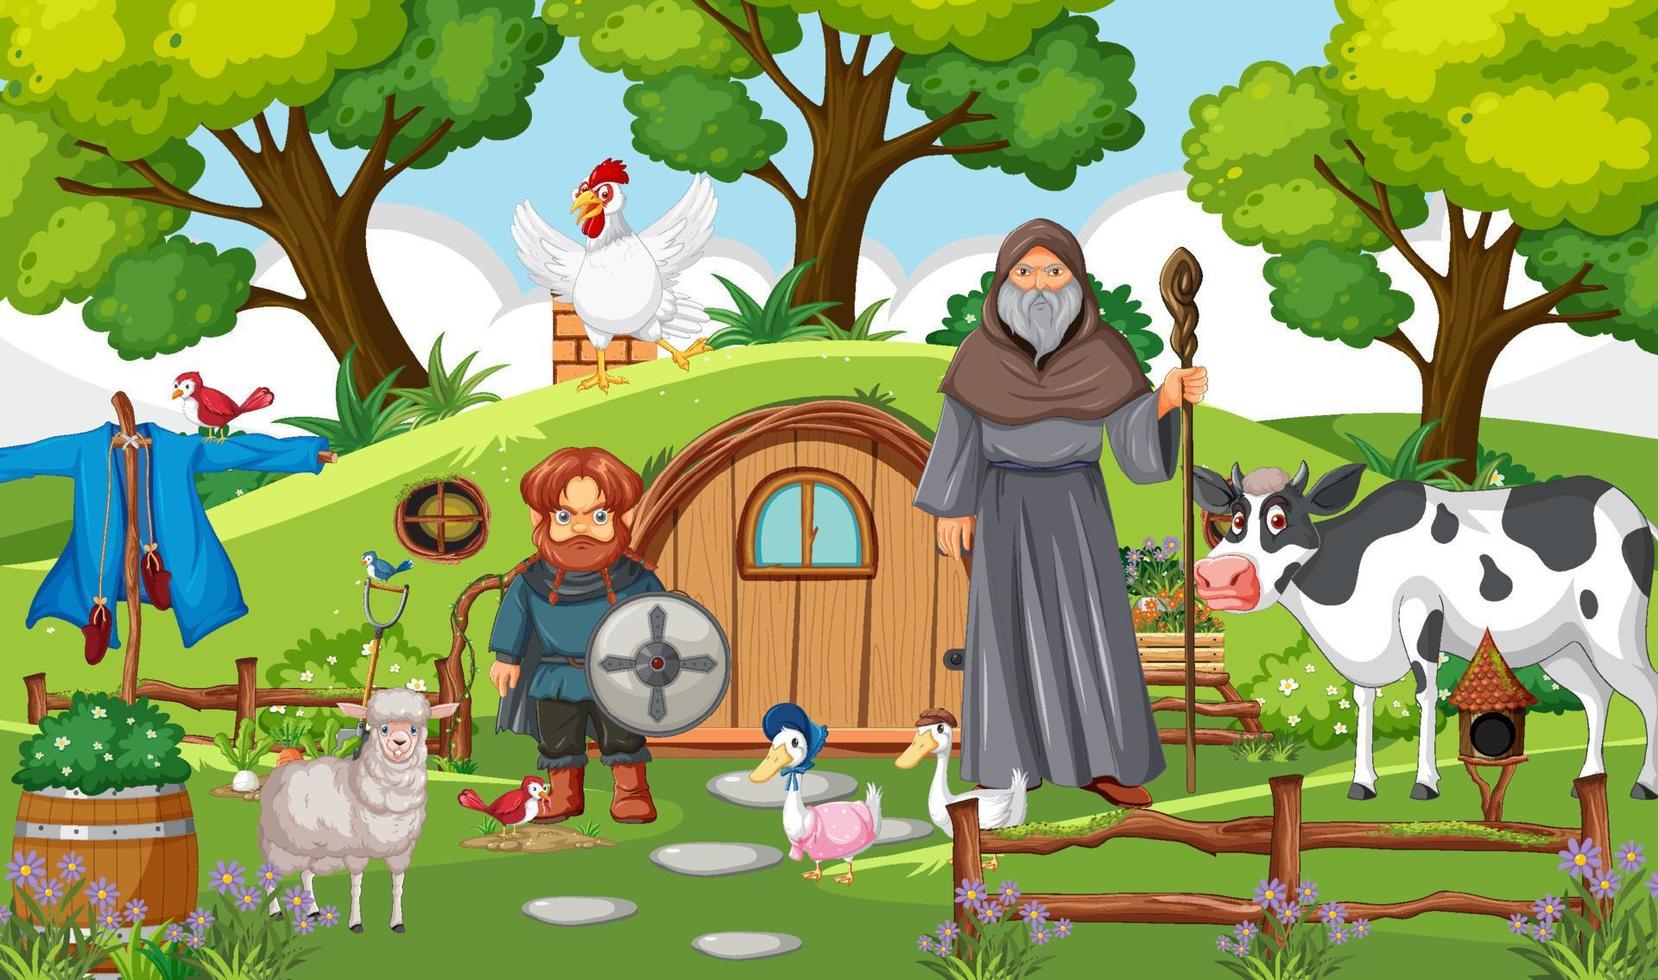 Enchanted scene with medieval cartoon characters vector